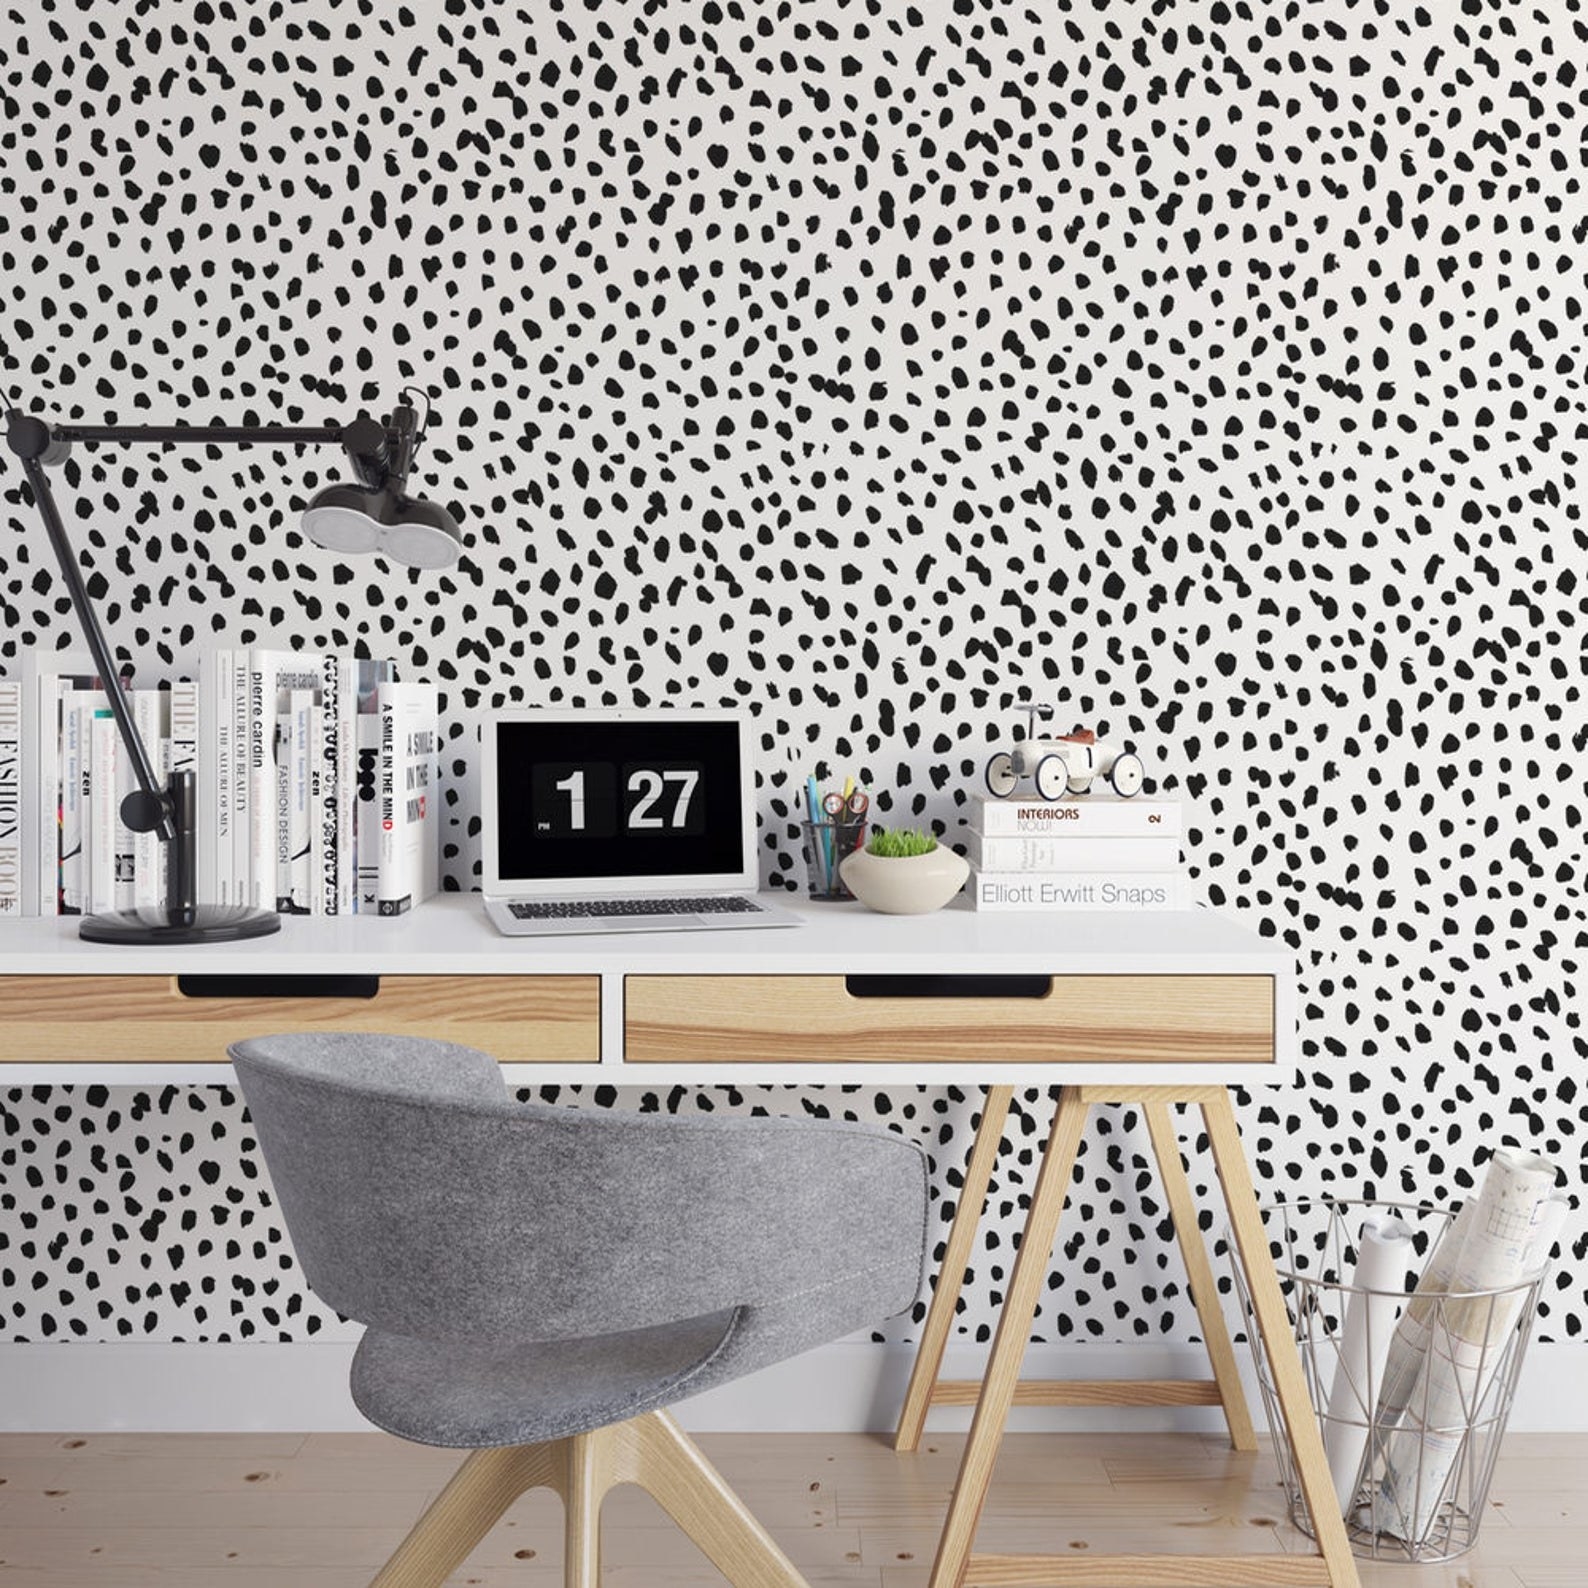 The wallpaper in a home office